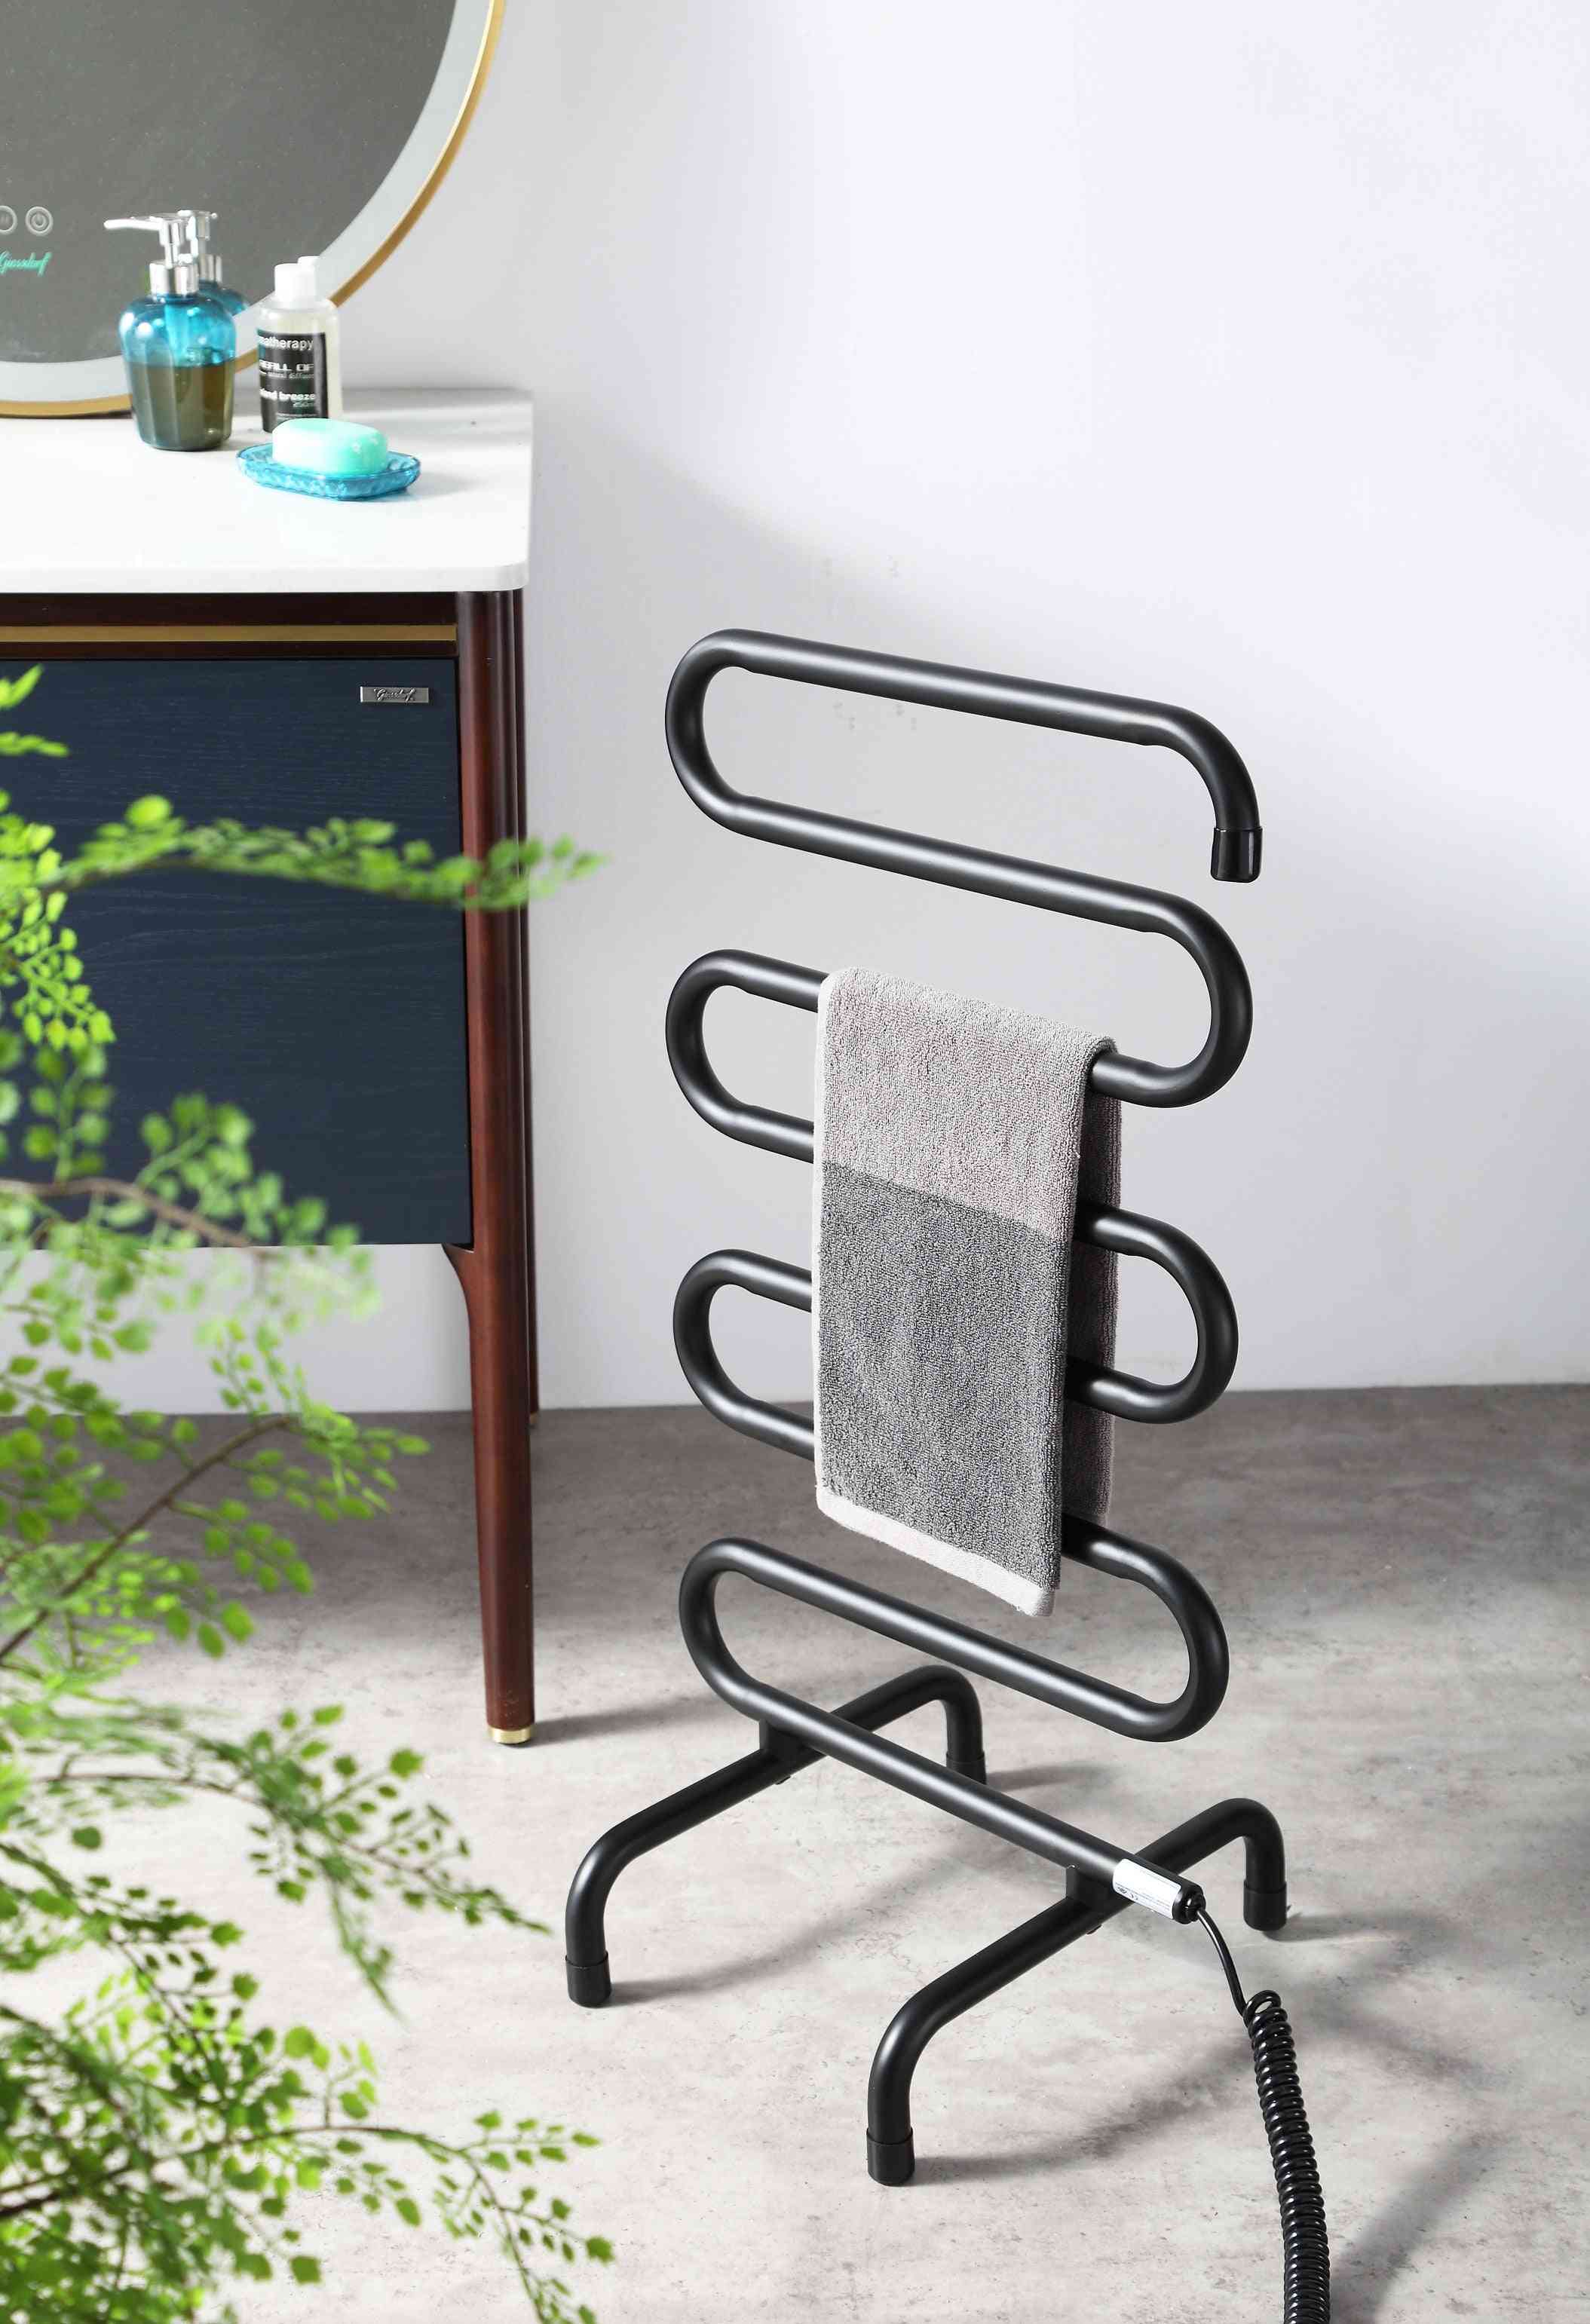 Stainless Steel, Portable And Electric Towel Drying Rack